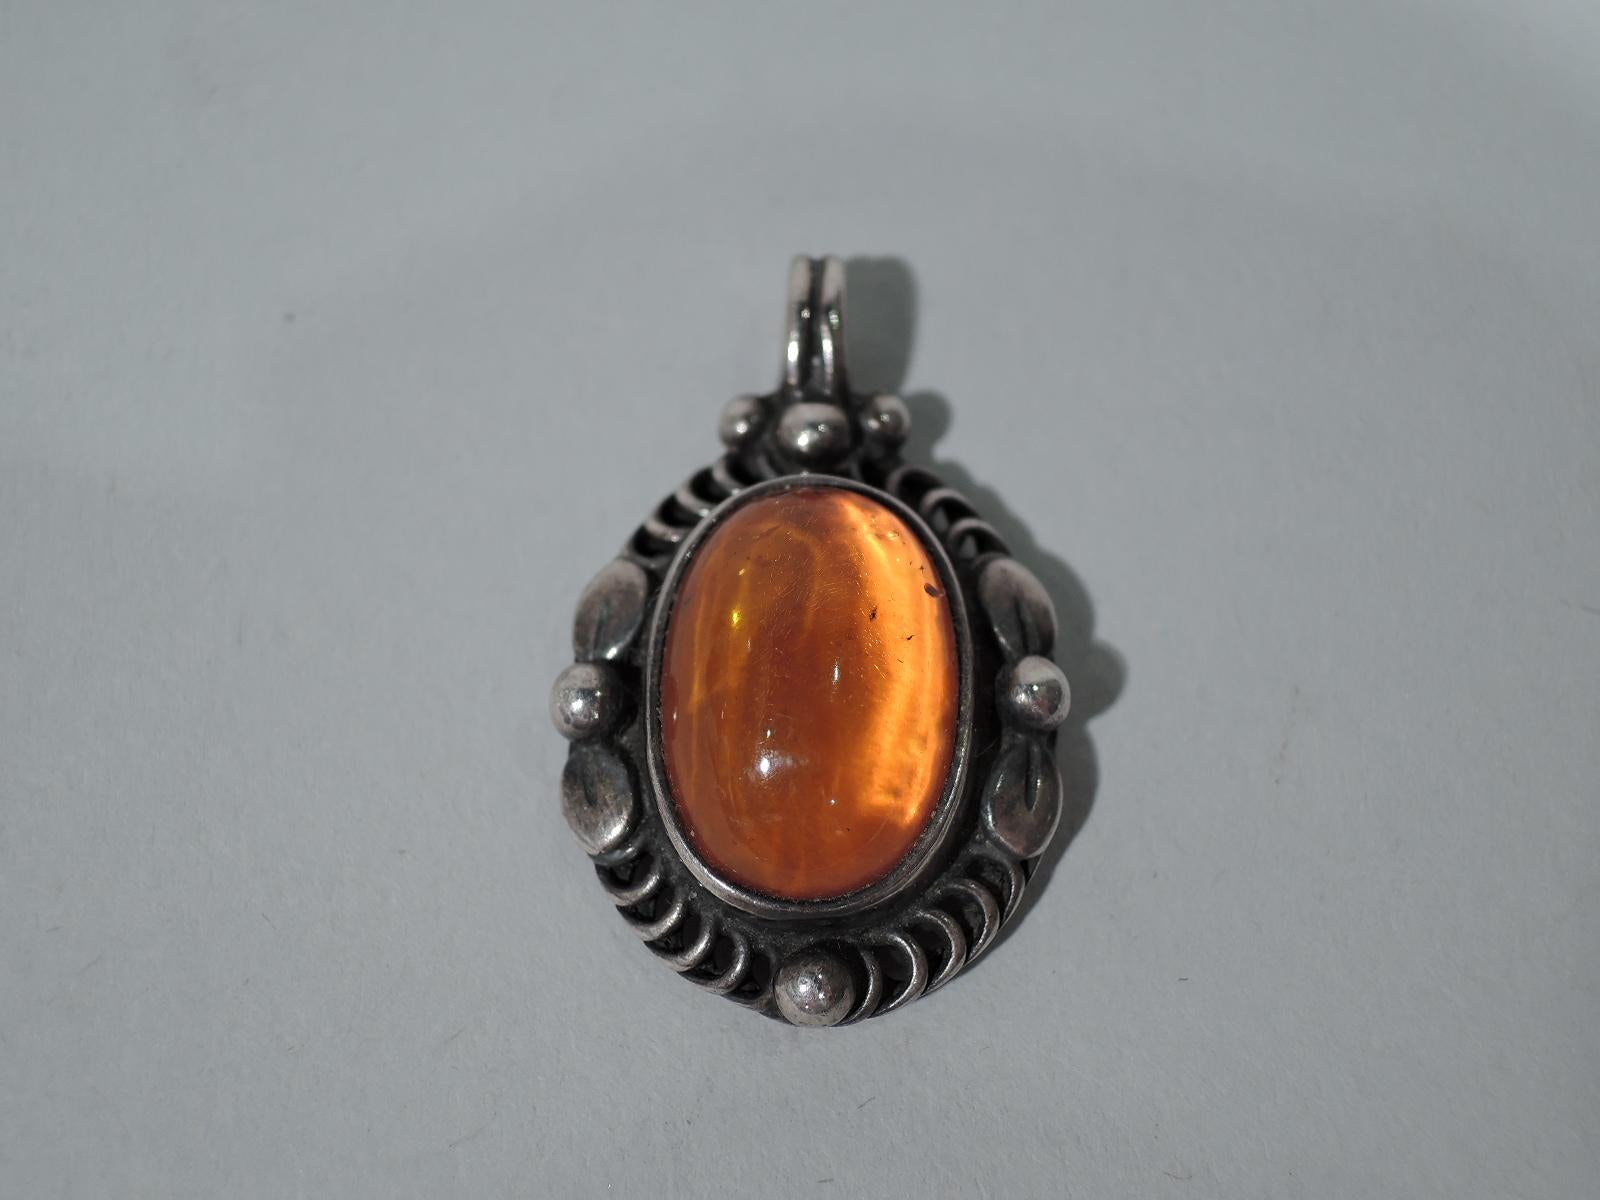 Art Nouveau Sterling silver and amber pendant. Made by Georg Jensen in Copenhagen in 1995. Oval cabochon-cut amber stone set in mount with beading, stylized leaves, and open imbricated circles. Fully marked including year.

Height (with bail): 1 1/4